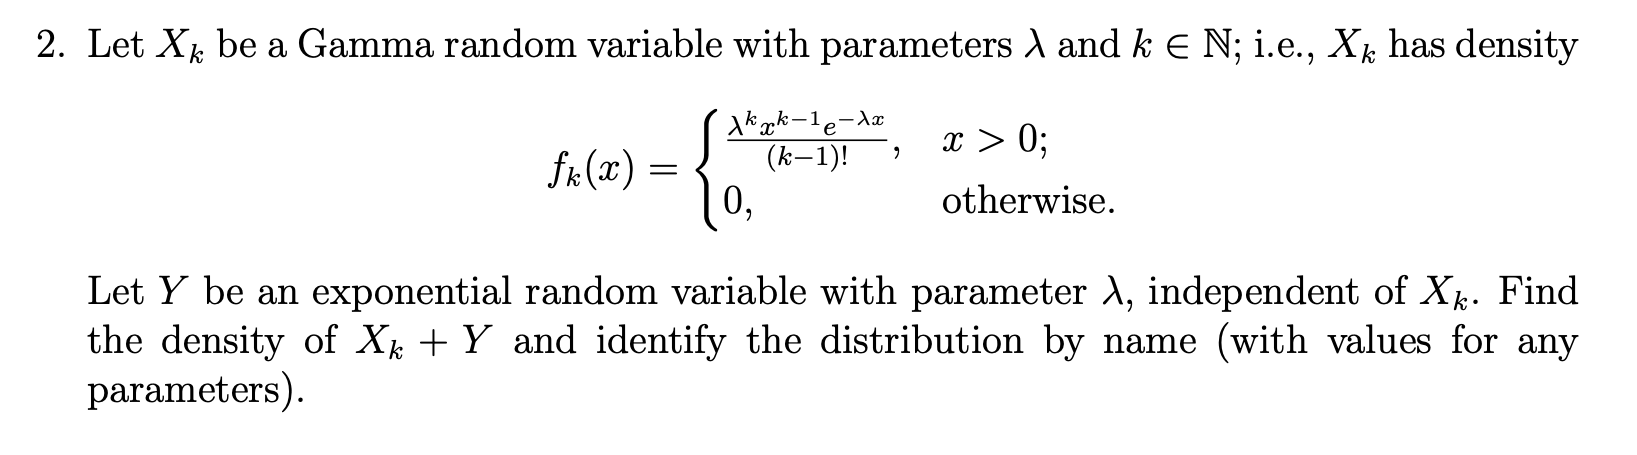 2. Let X be a Gamma random variable with parameters A and k E N; i.e., X has density
入kek-le-
(k-1)!
dx
x > 0;
fr(x) =
0,
otherwise.
Let Y be an exponential random variable with parameter A, independent of X. Find
the density of X + Y and identify the distribution by name (with values for any
parameters).
